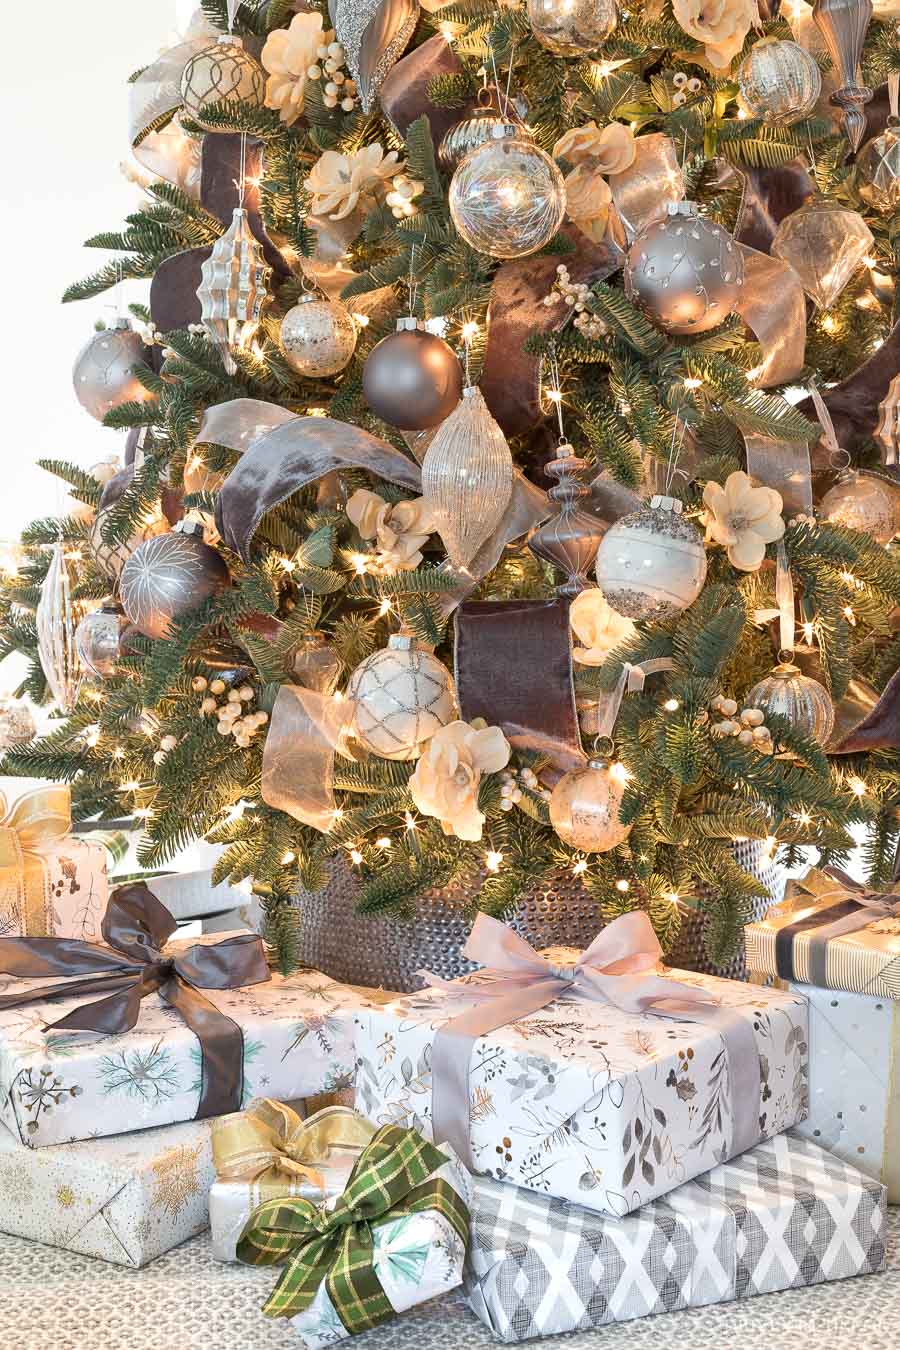 You'd never know this Christmas tree is faux! The branches are so realistic!